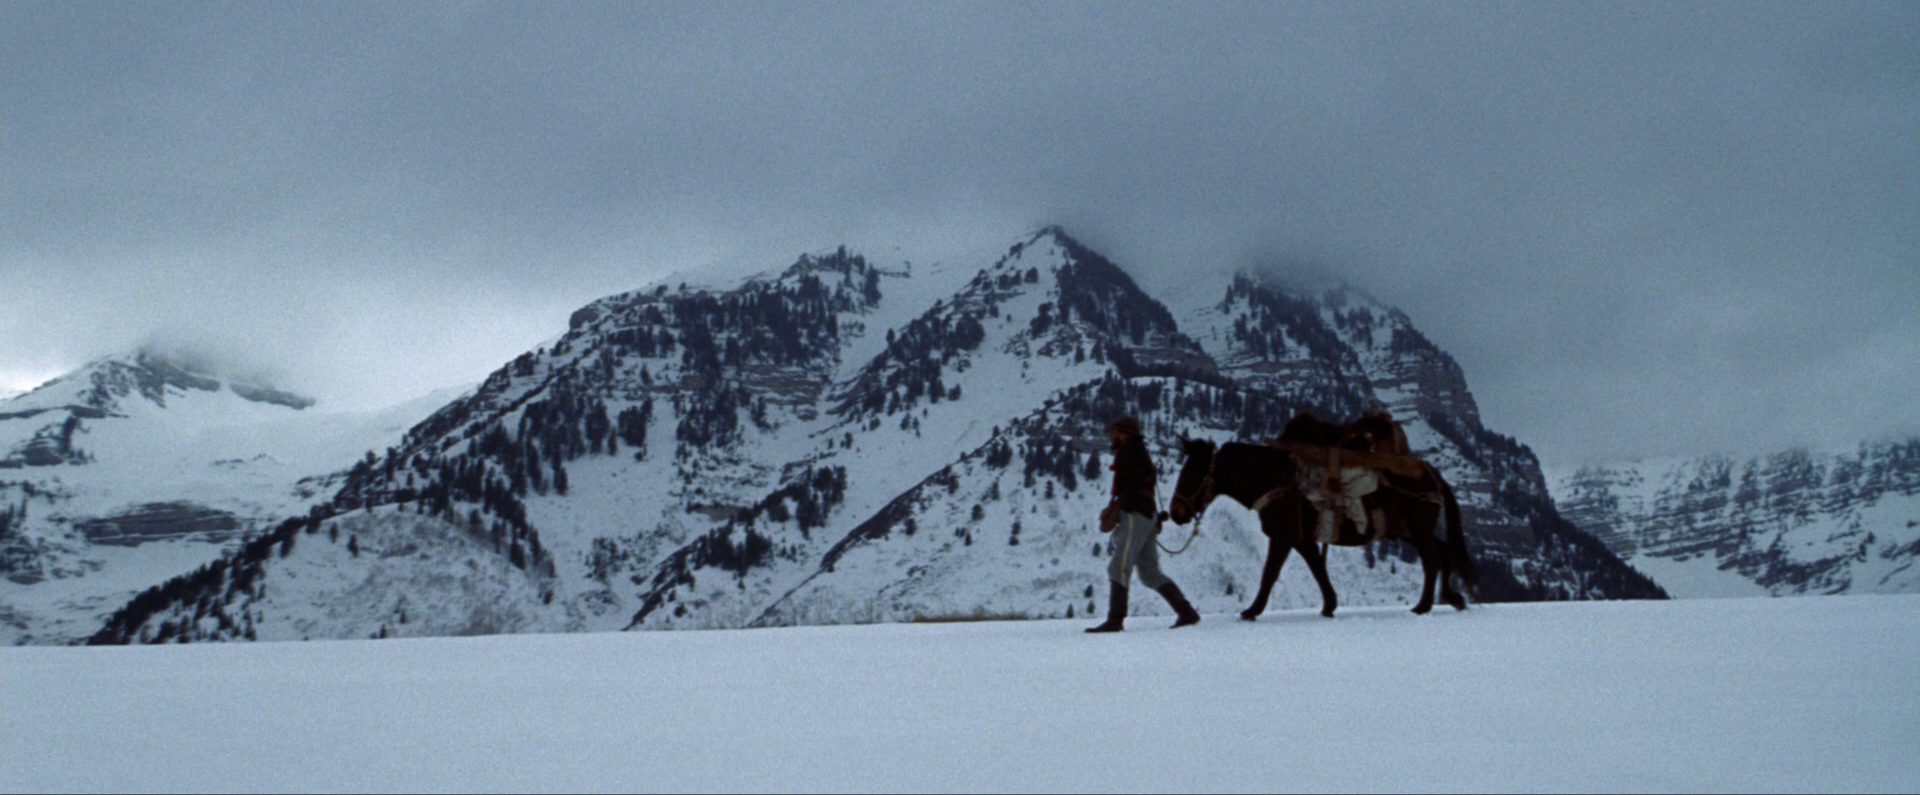 Robert Redford, as Jeremiah Johnson, trudges through an icy landscape with a horse on a leash and snow-covered mountains in the background.